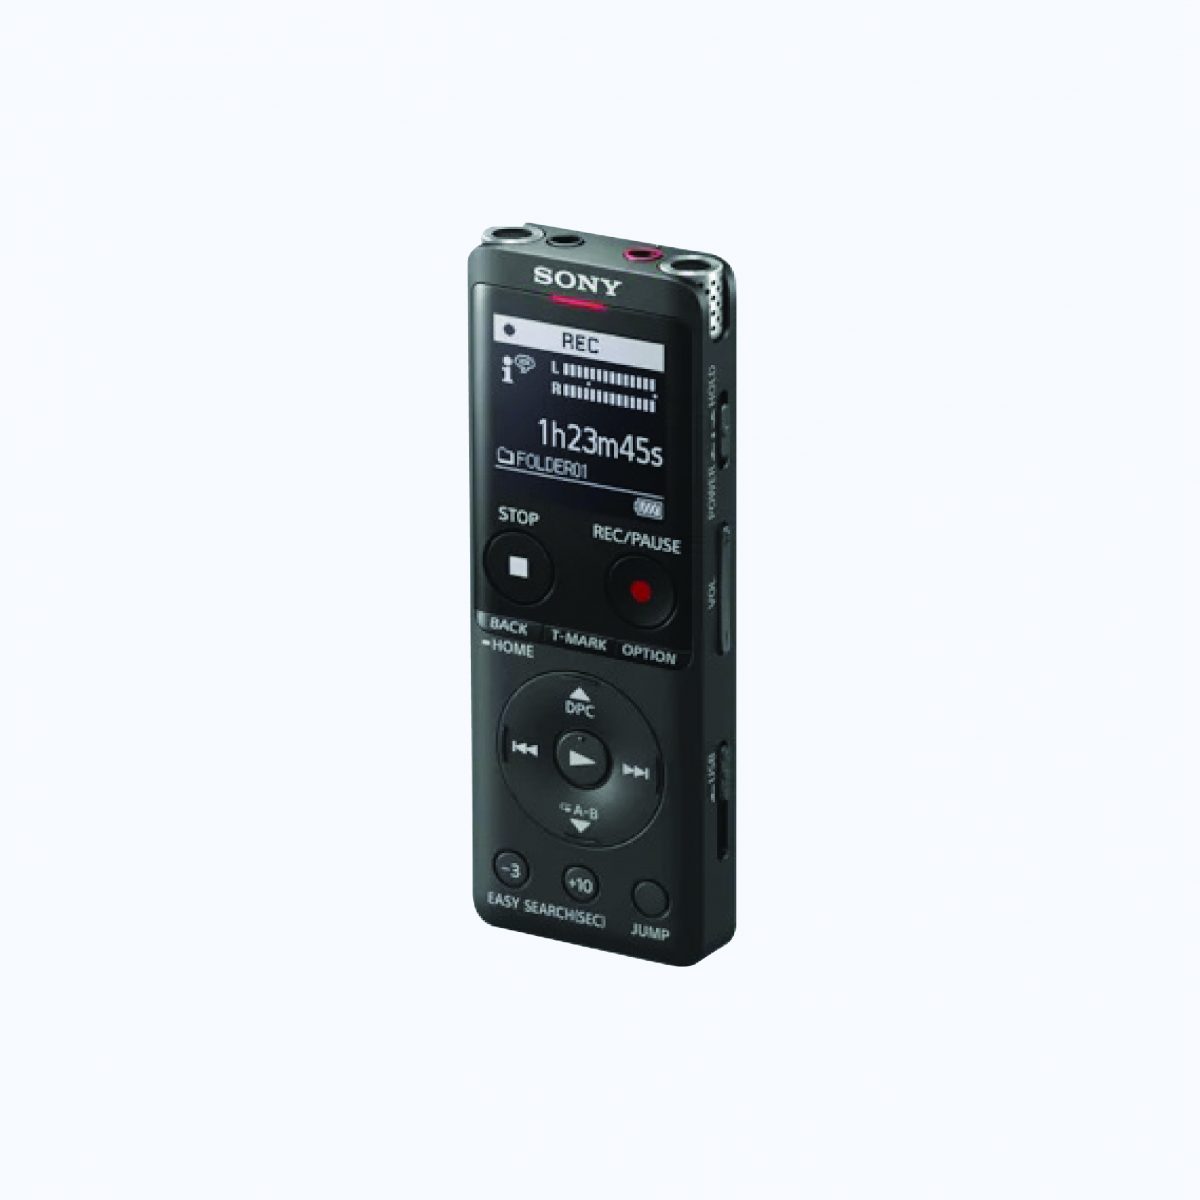 Sony ICD-UX570F Digital Voice Recorder in Bangladesh